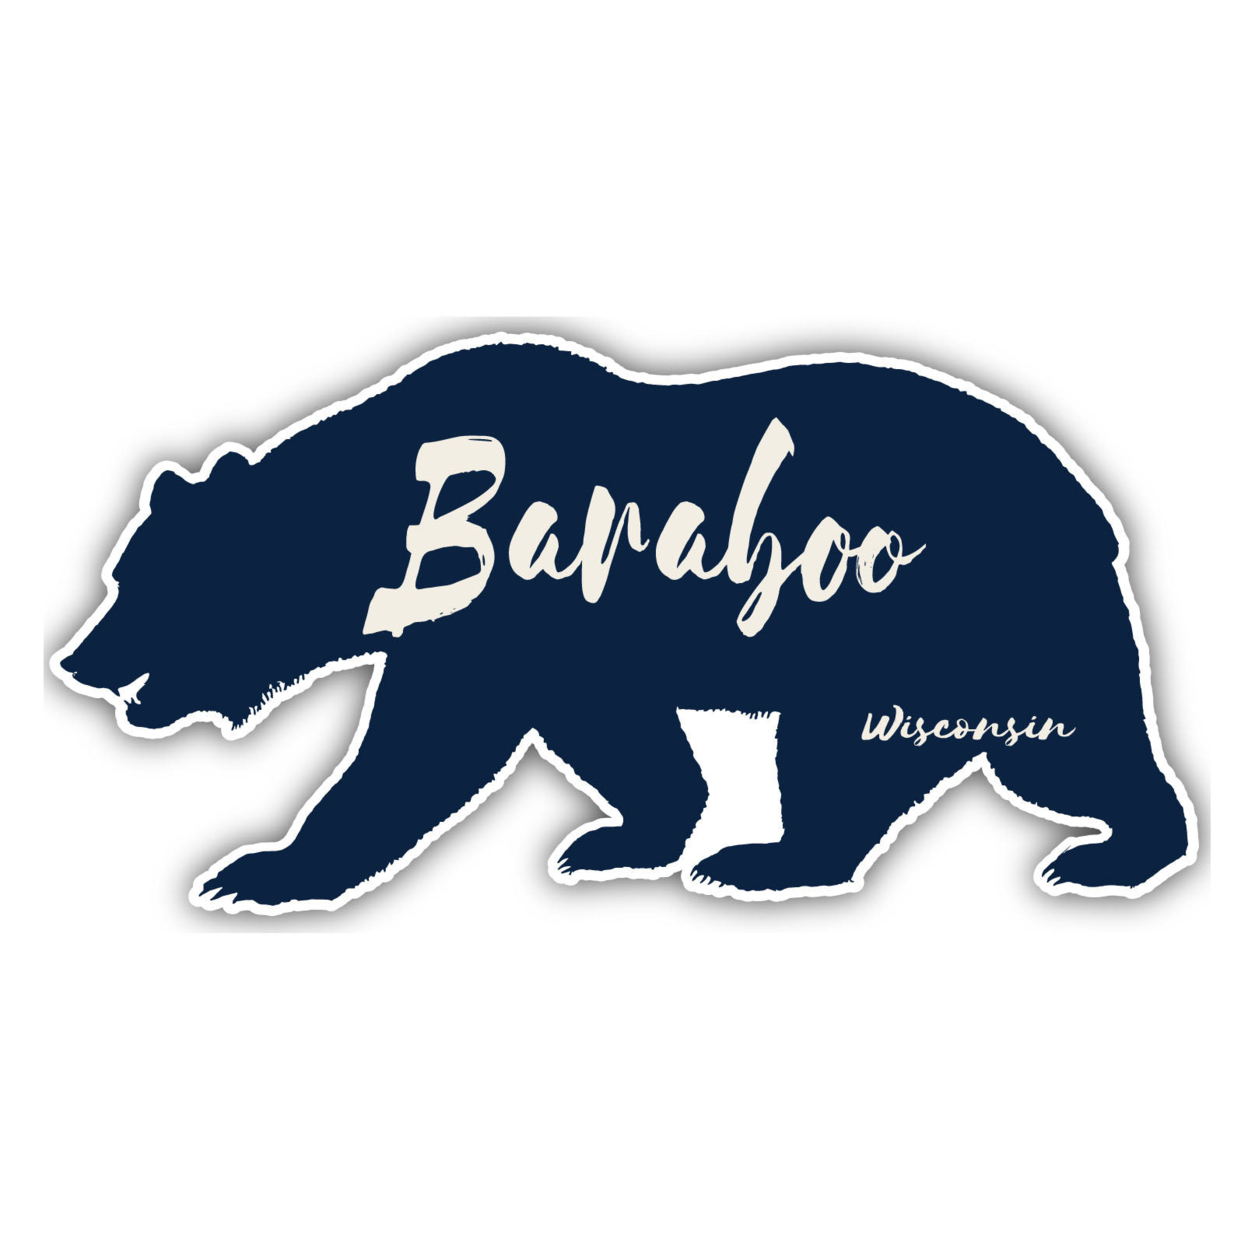 Baraboo Wisconsin Souvenir Decorative Stickers (Choose Theme And Size) - 4-Pack, 8-Inch, Bear